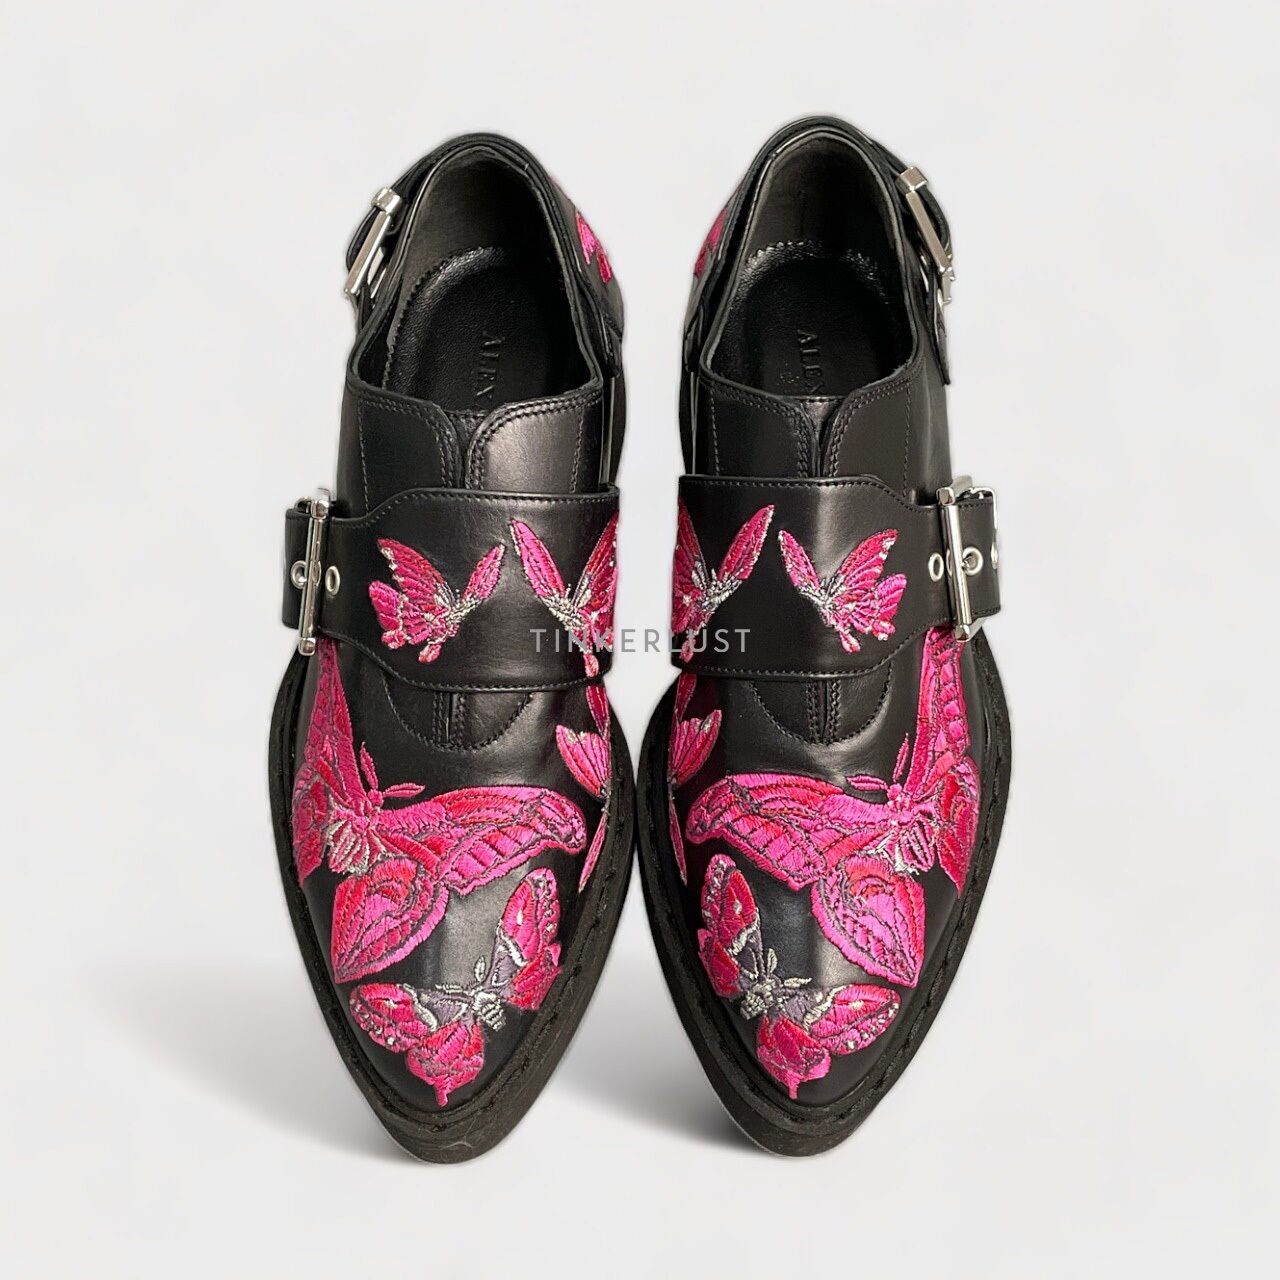 Alexander McQueen Black Butterfly Embroidered Leather Monk Strap Platform Loafers